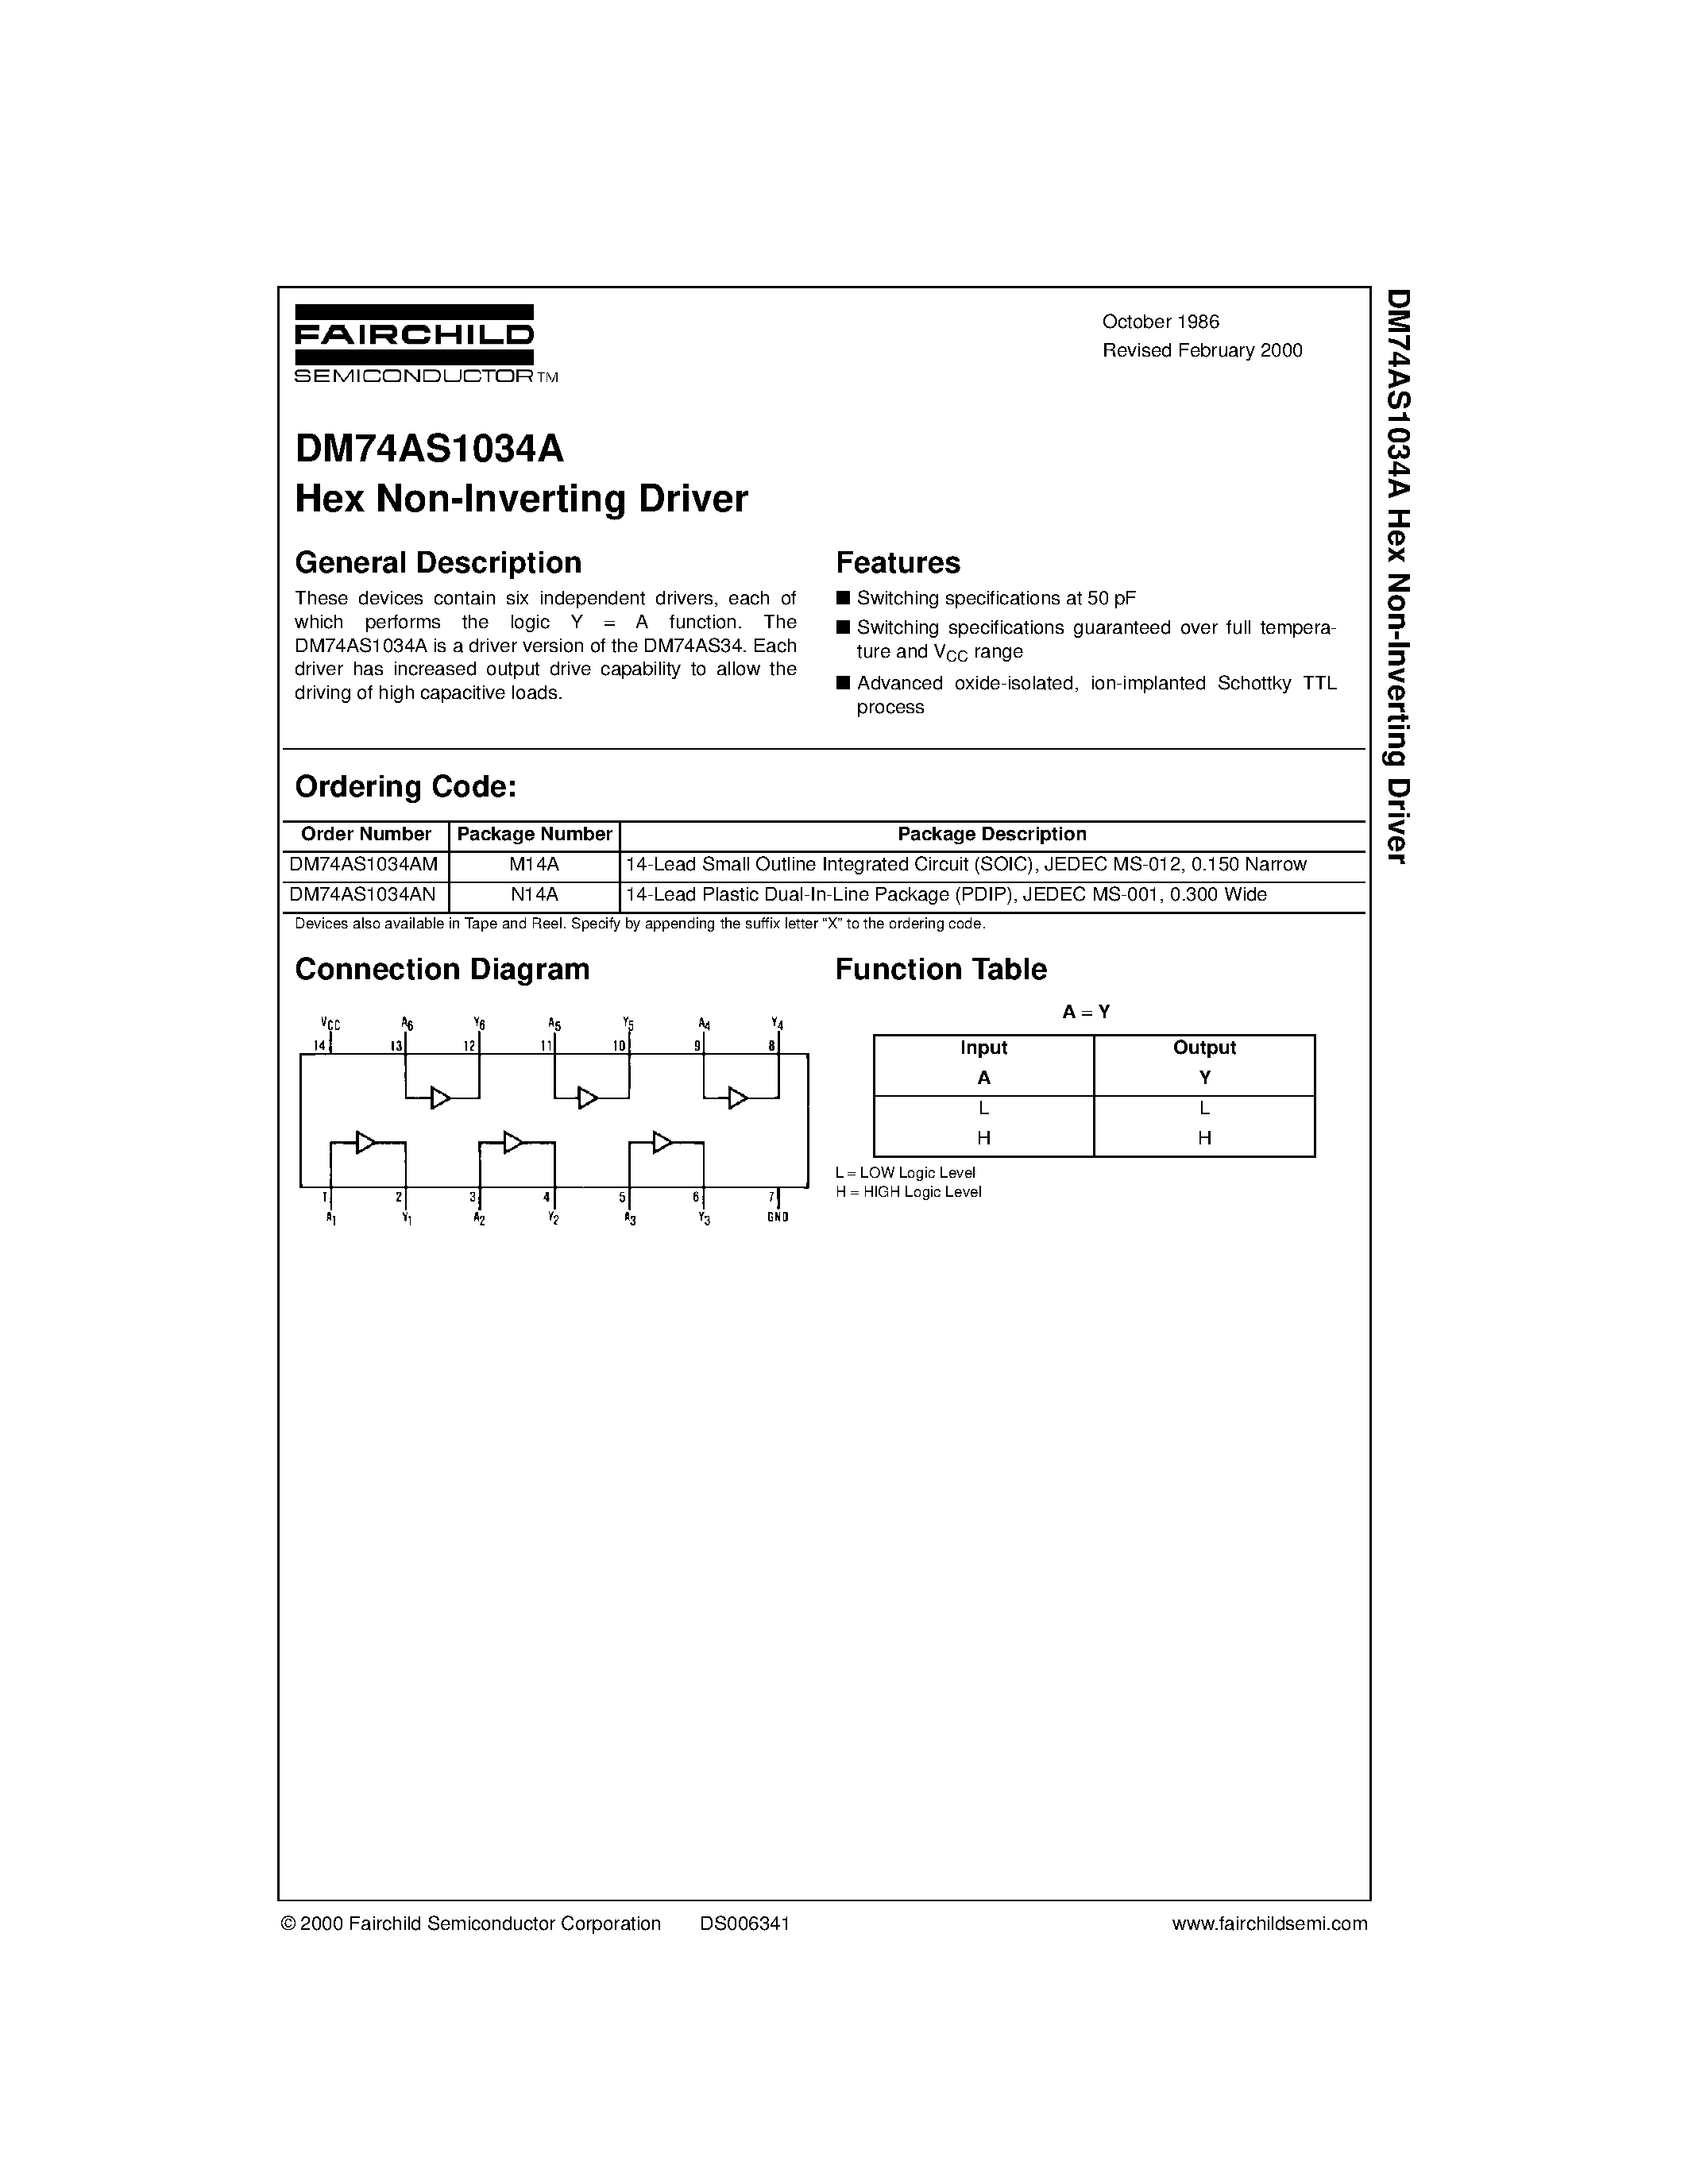 Datasheet DM74AS1034AM - Hex Non-Inverting Driver page 1